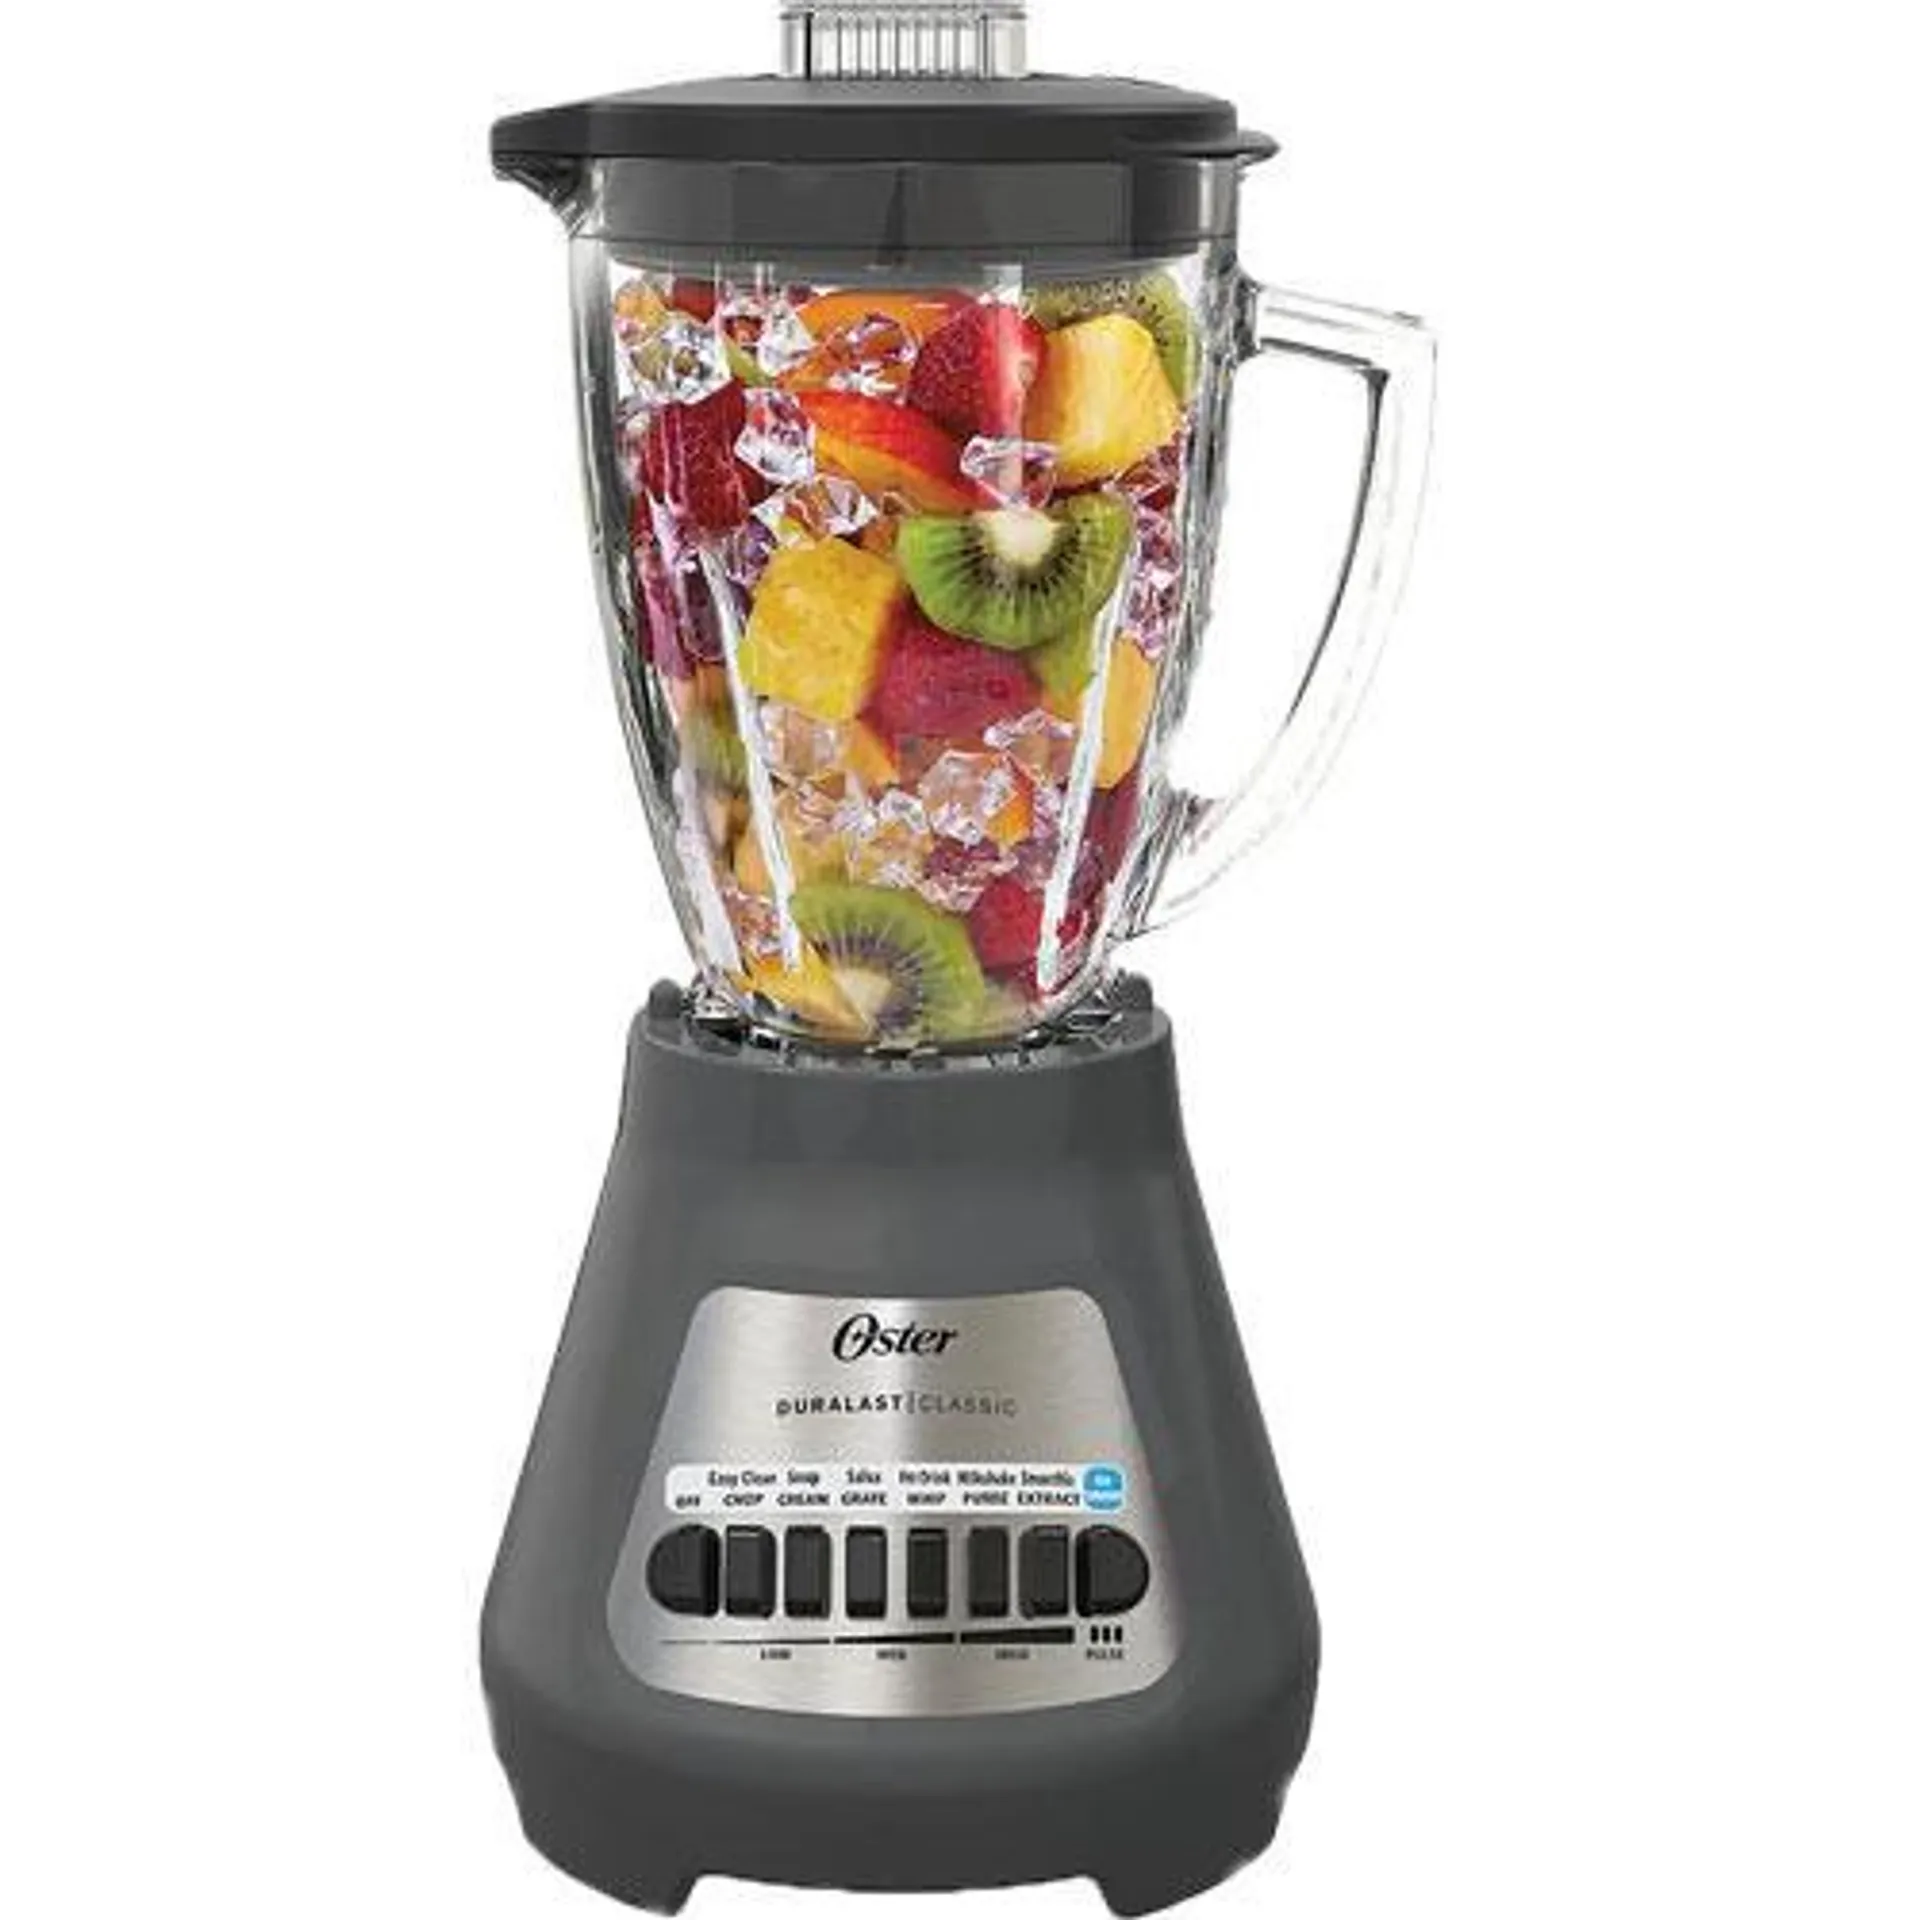 Classic Series 8-Speed Blender With Crush Pro 4® Blade - Chrome